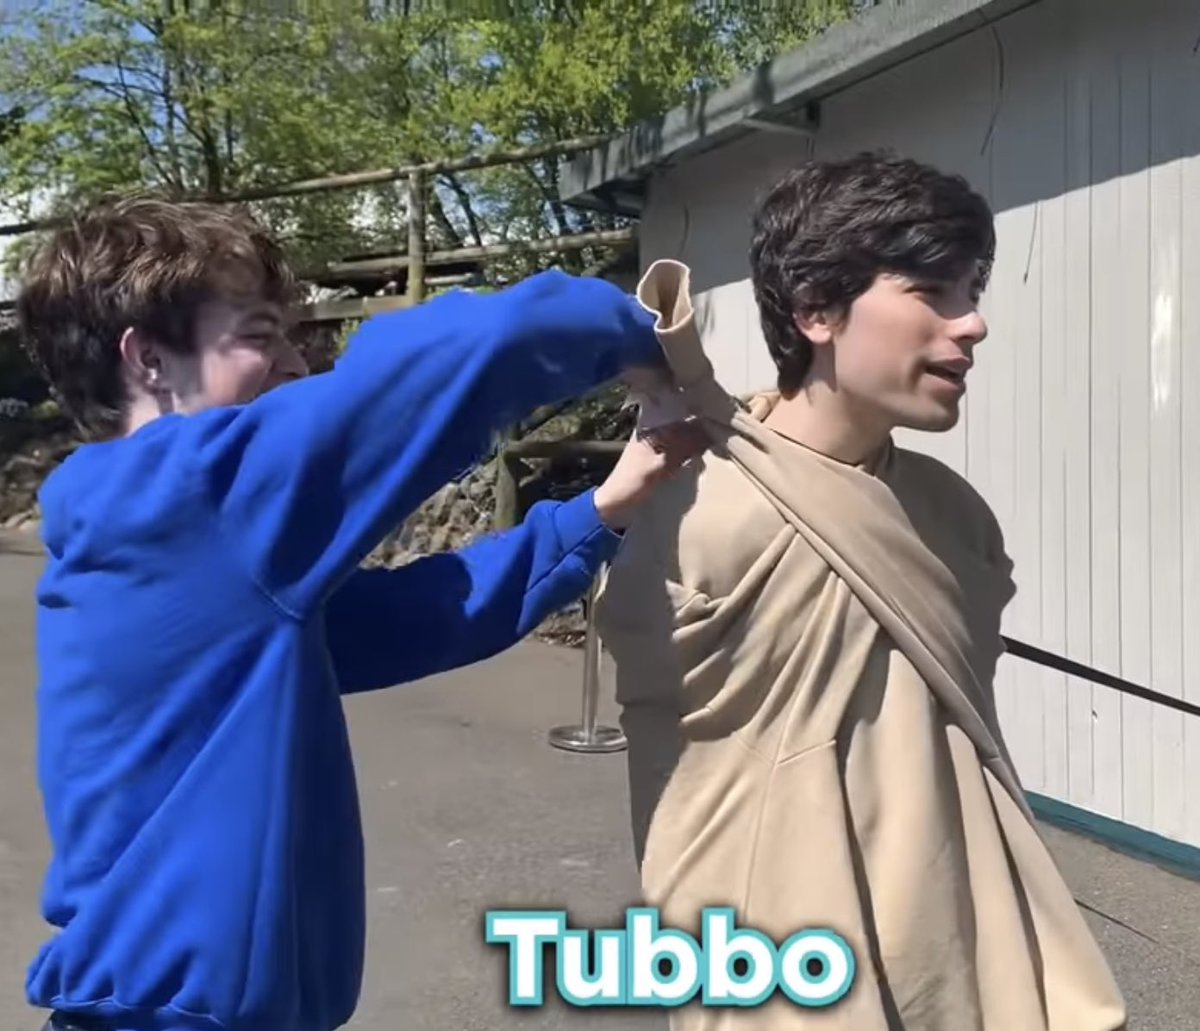 How tall is tubbo